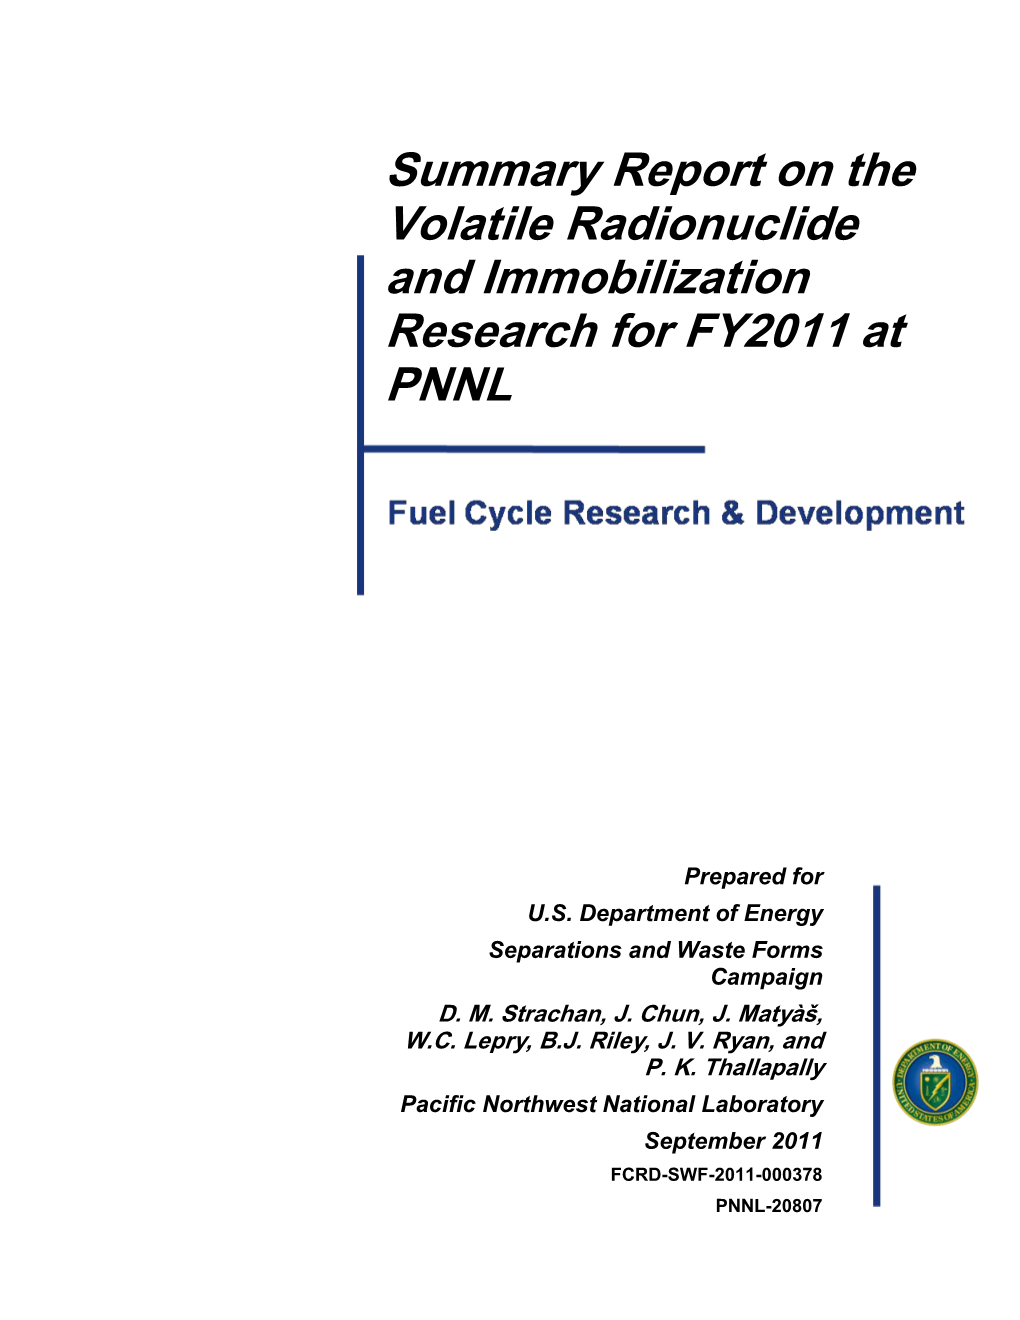 Summary Report on the Volatile Radionuclide and Immobilization Research for FY2011 at PNNL